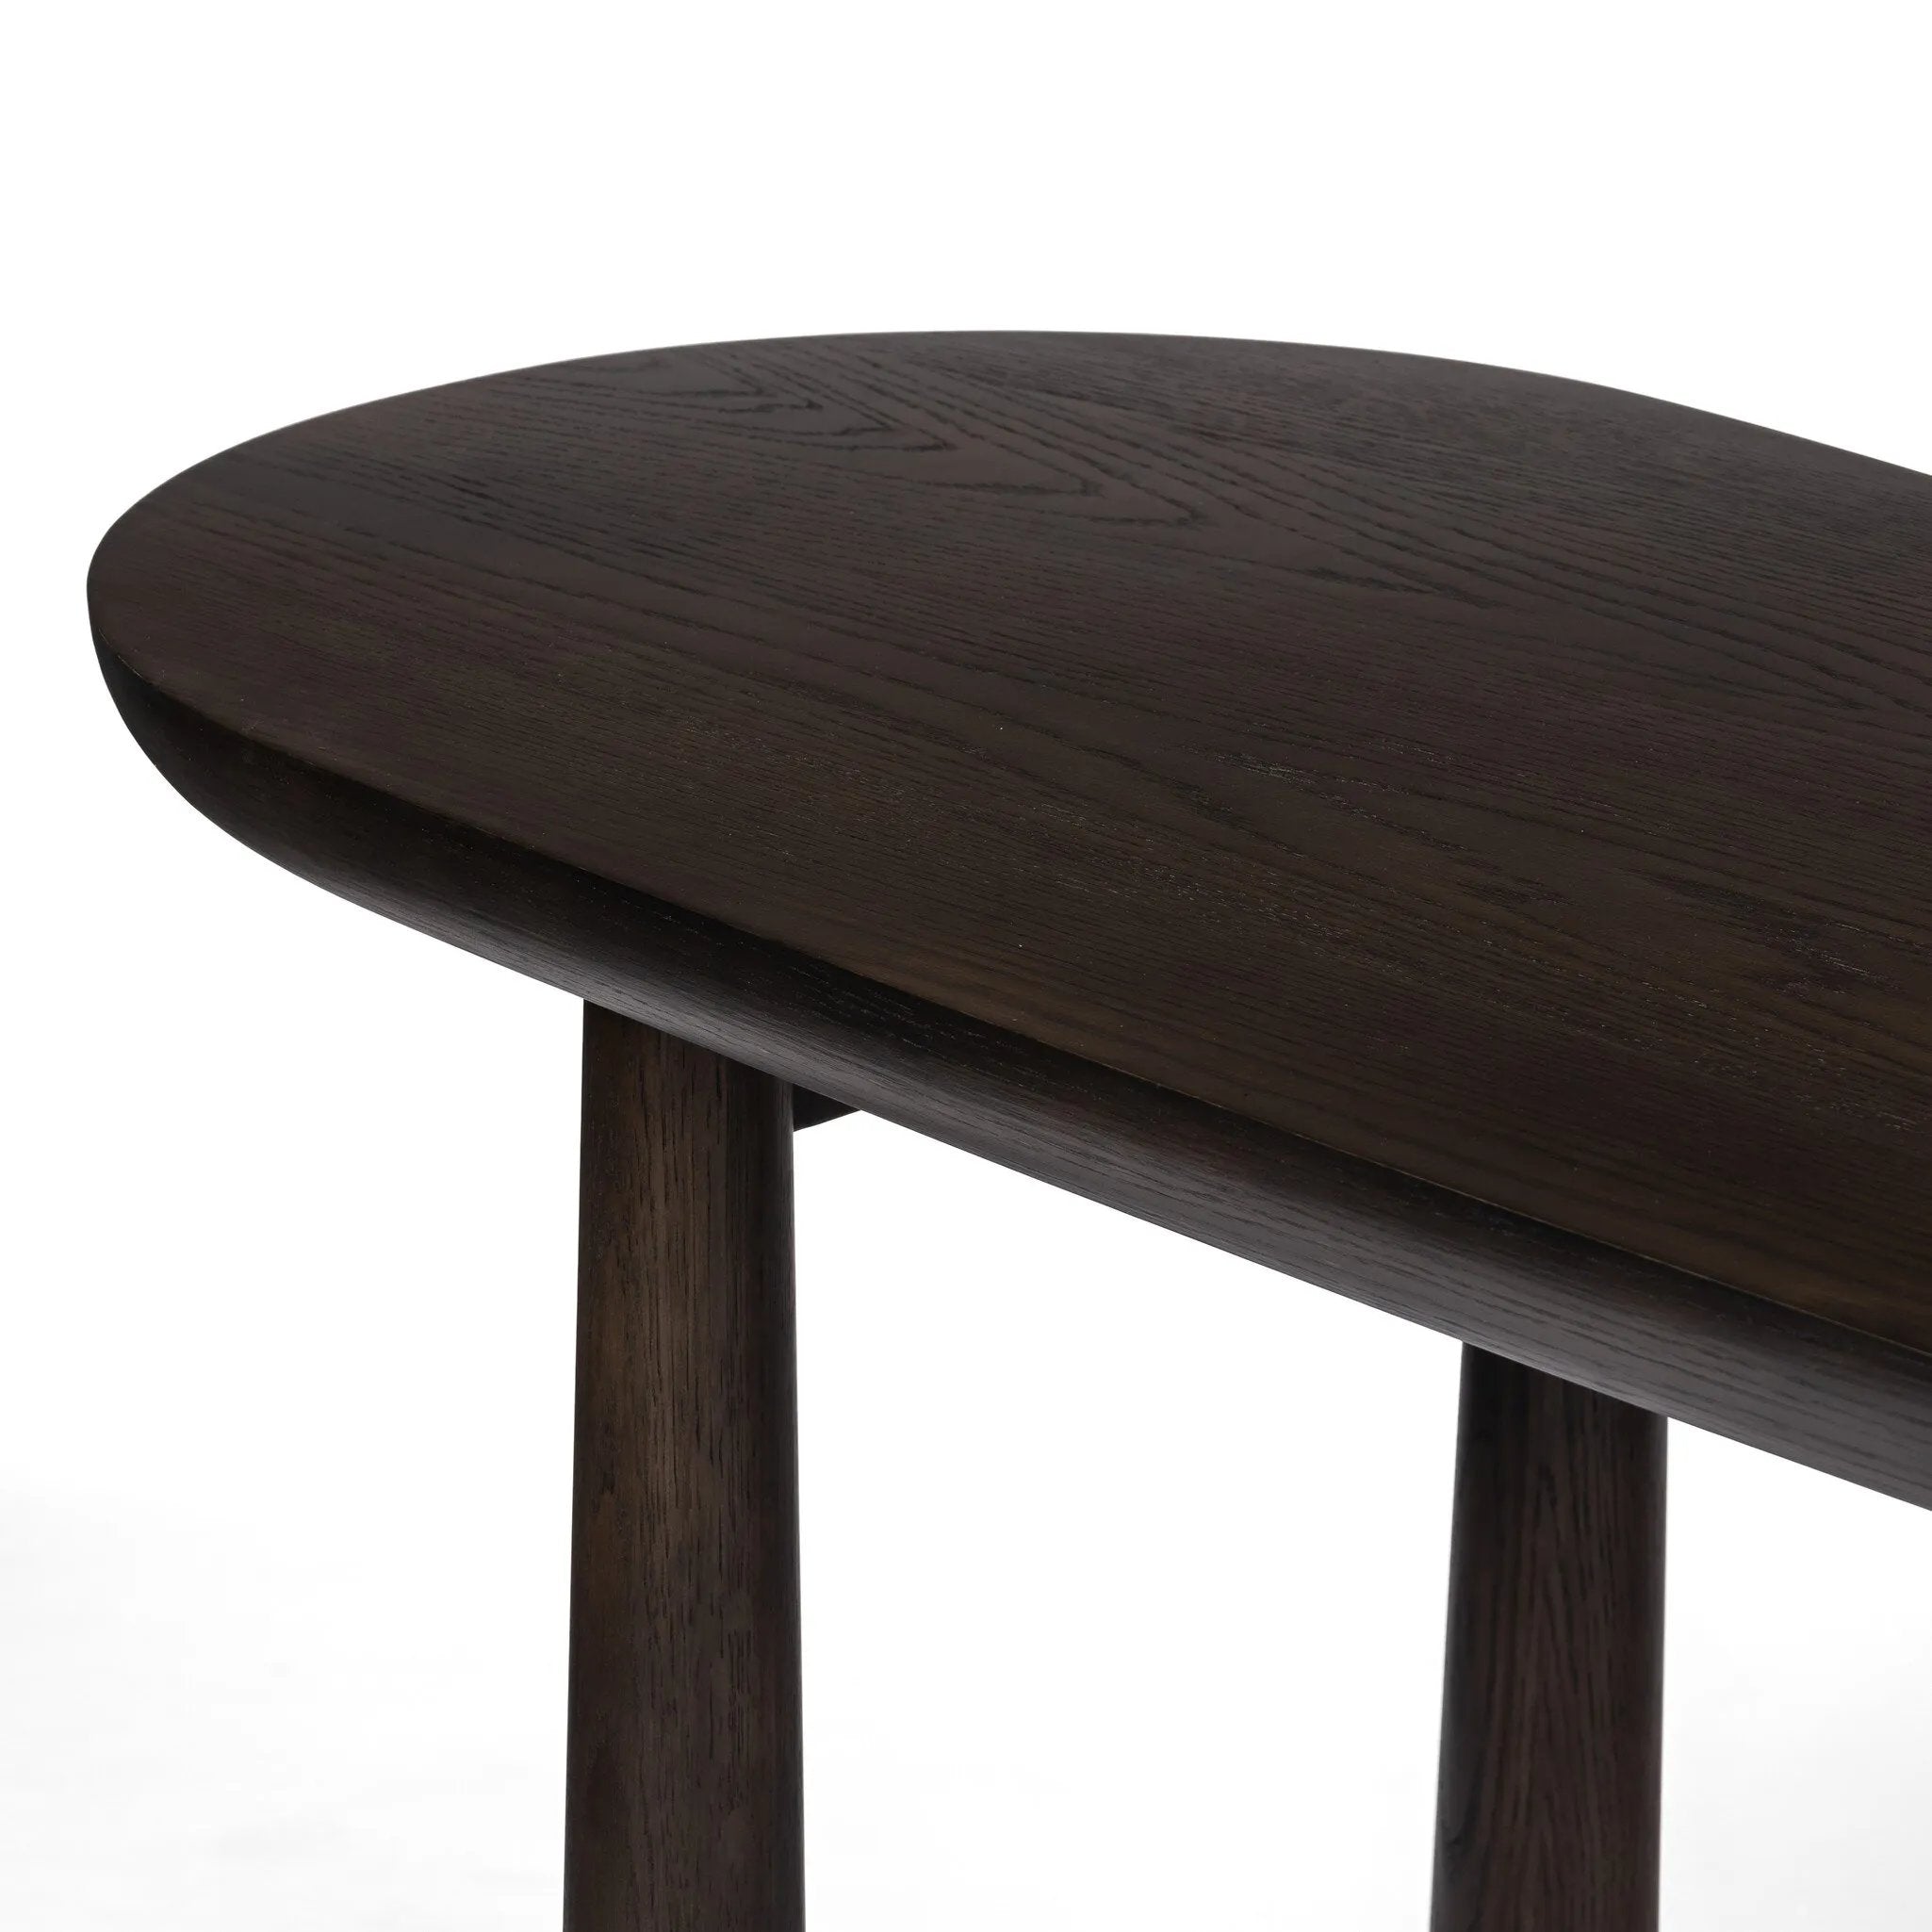 A smoothly shaped desk of brown oak veneer stands on tapered, cylindrical legs, meeting clean lines with an organic aesthetic.Collection: Westgat Amethyst Home provides interior design, new home construction design consulting, vintage area rugs, and lighting in the Nashville metro area.